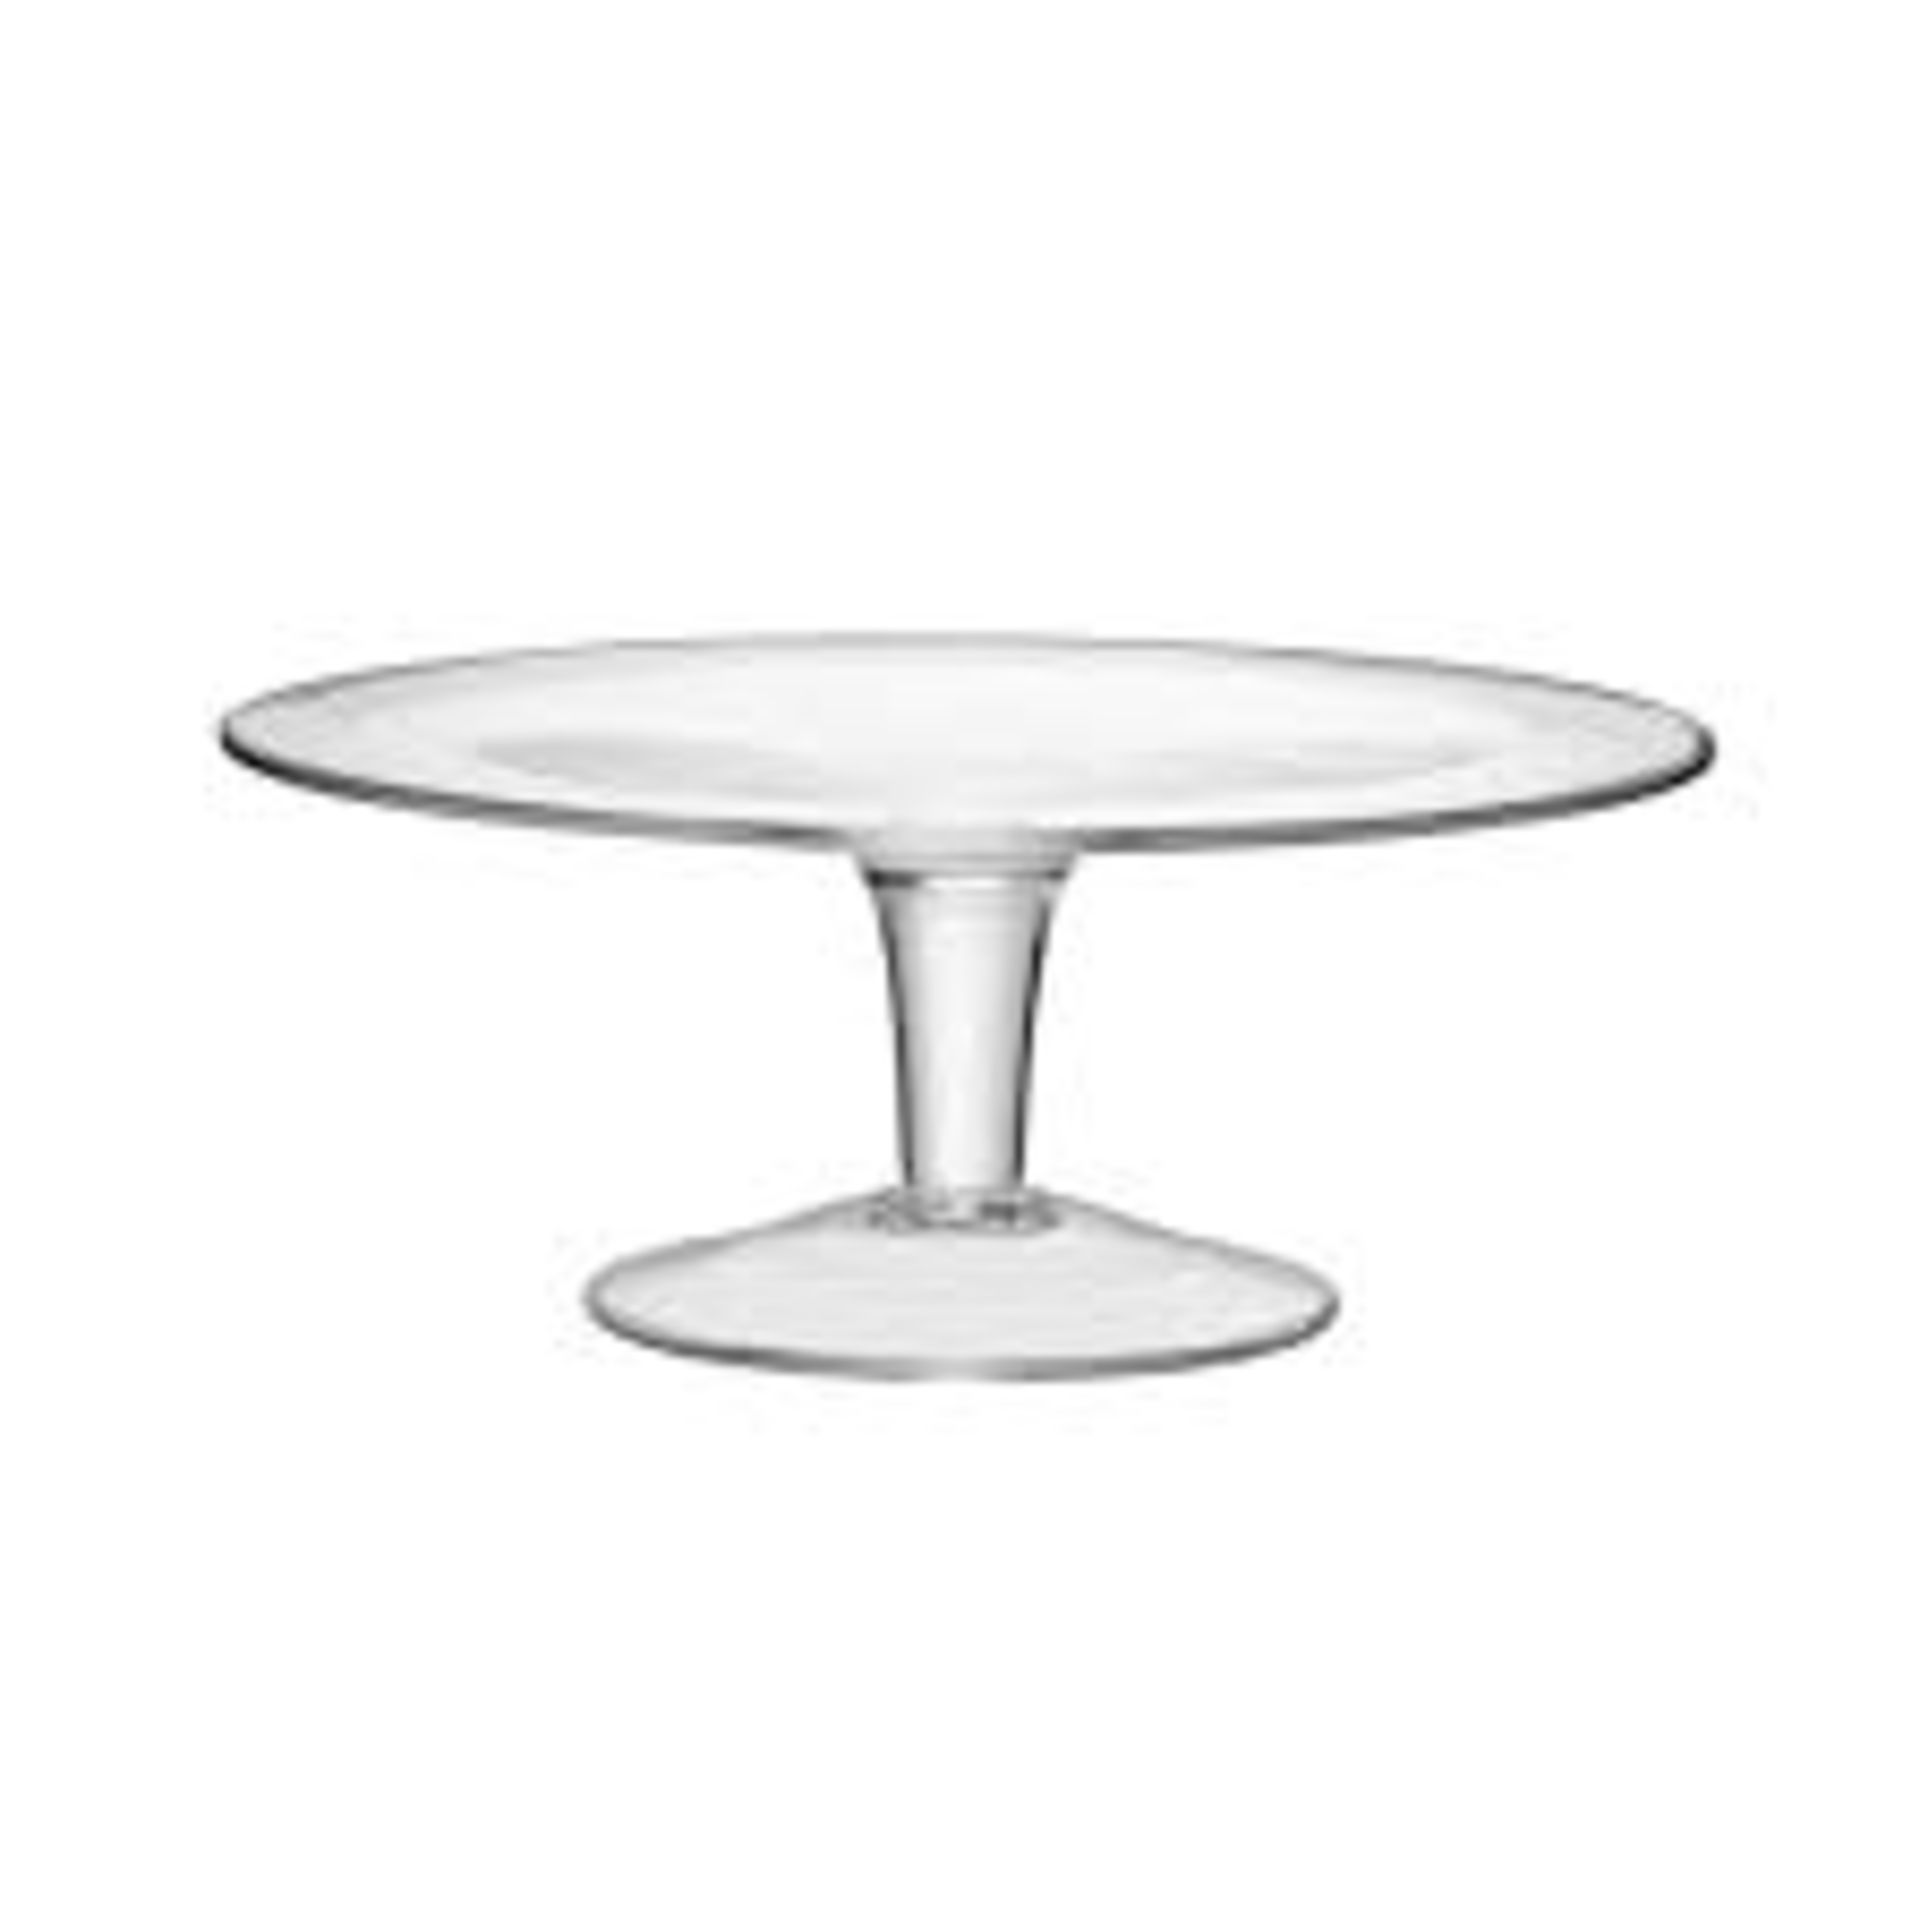 Boxed LSA International Glass Cake Stand RRP £50 (4026164) (04.01.20) (Public Viewing and Appraisals